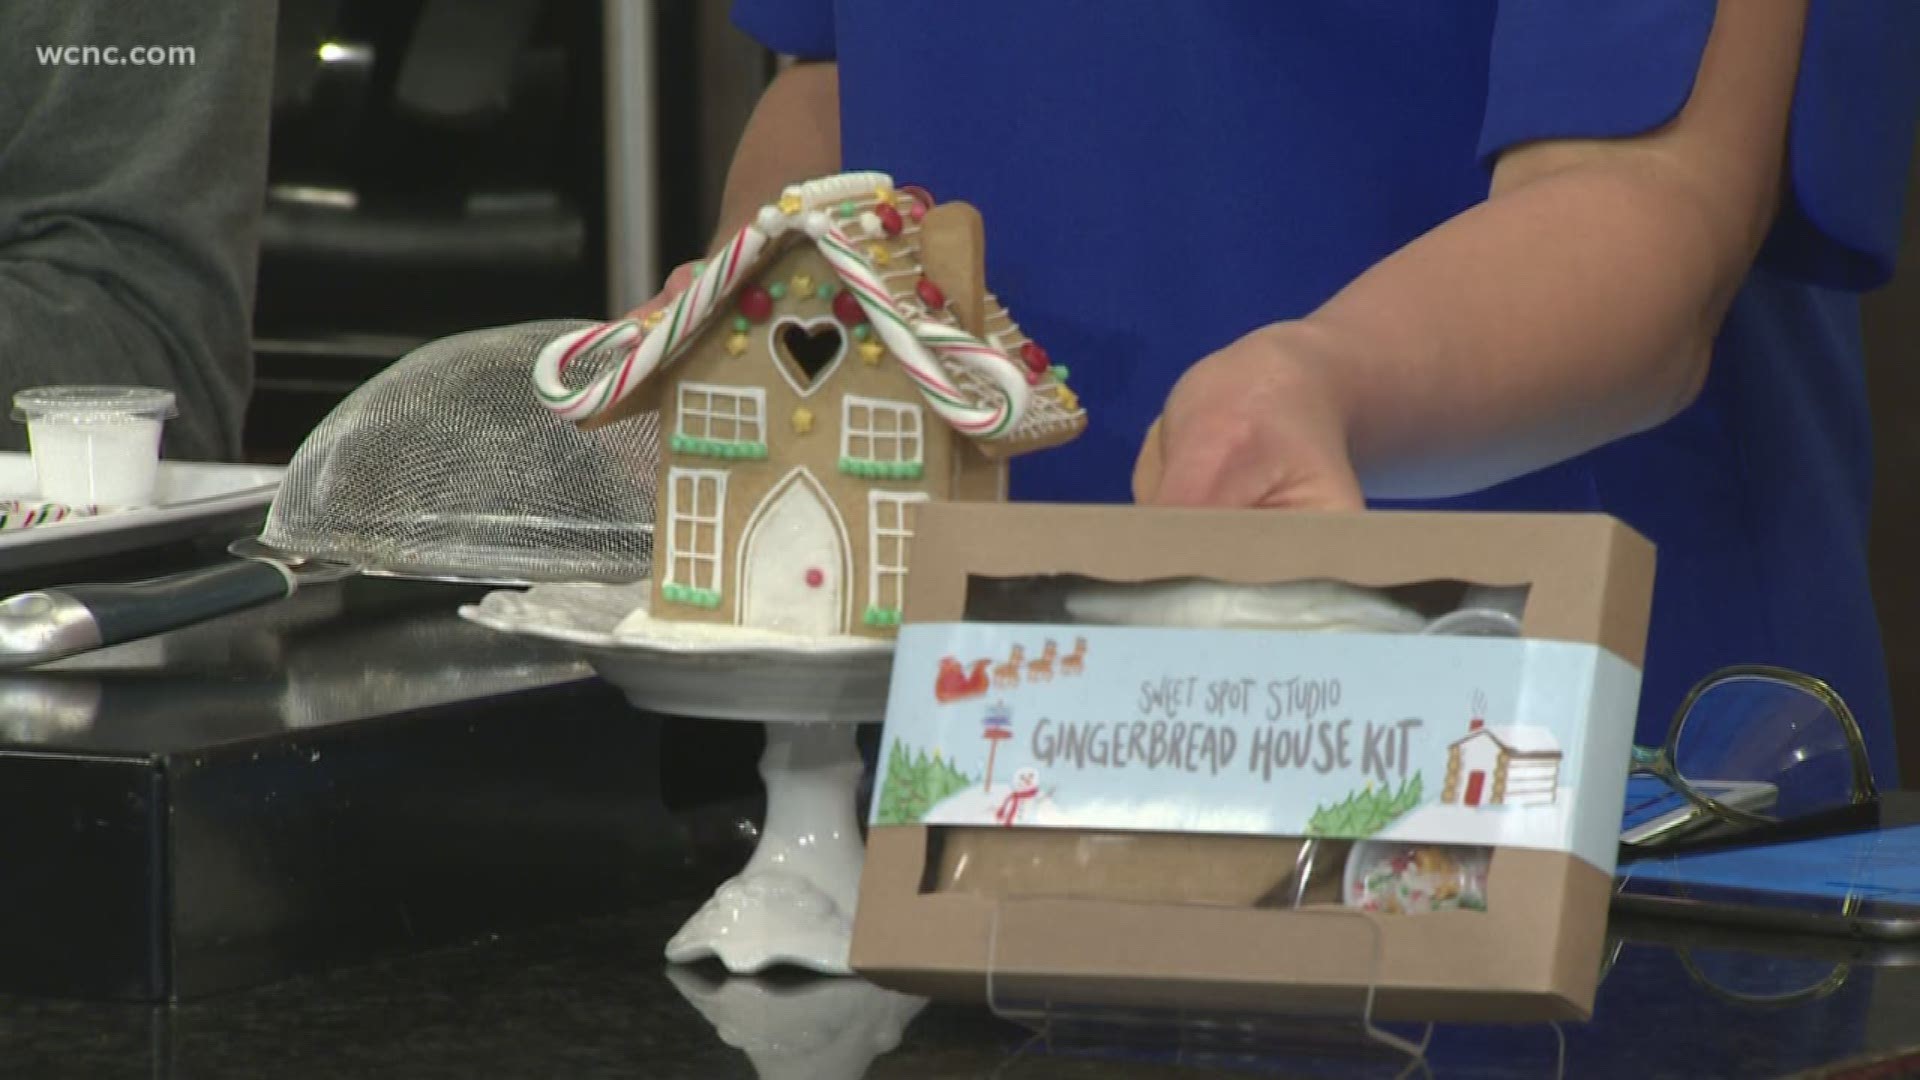 Make a special holiday memory by baking and assembling your own gingerbread house with the family.